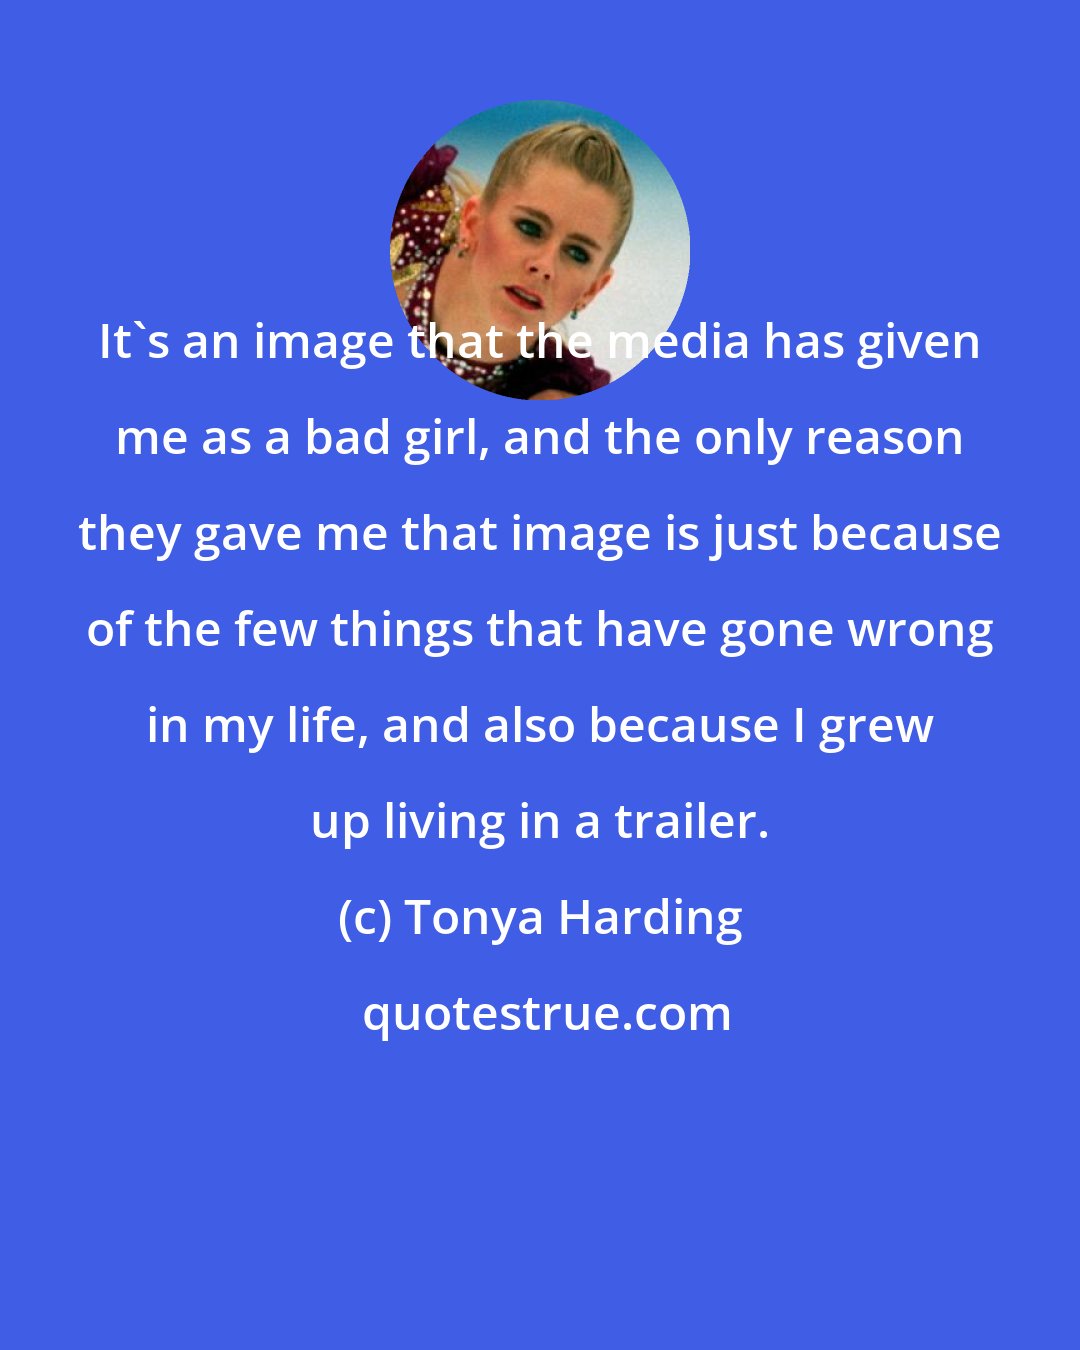 Tonya Harding: It's an image that the media has given me as a bad girl, and the only reason they gave me that image is just because of the few things that have gone wrong in my life, and also because I grew up living in a trailer.